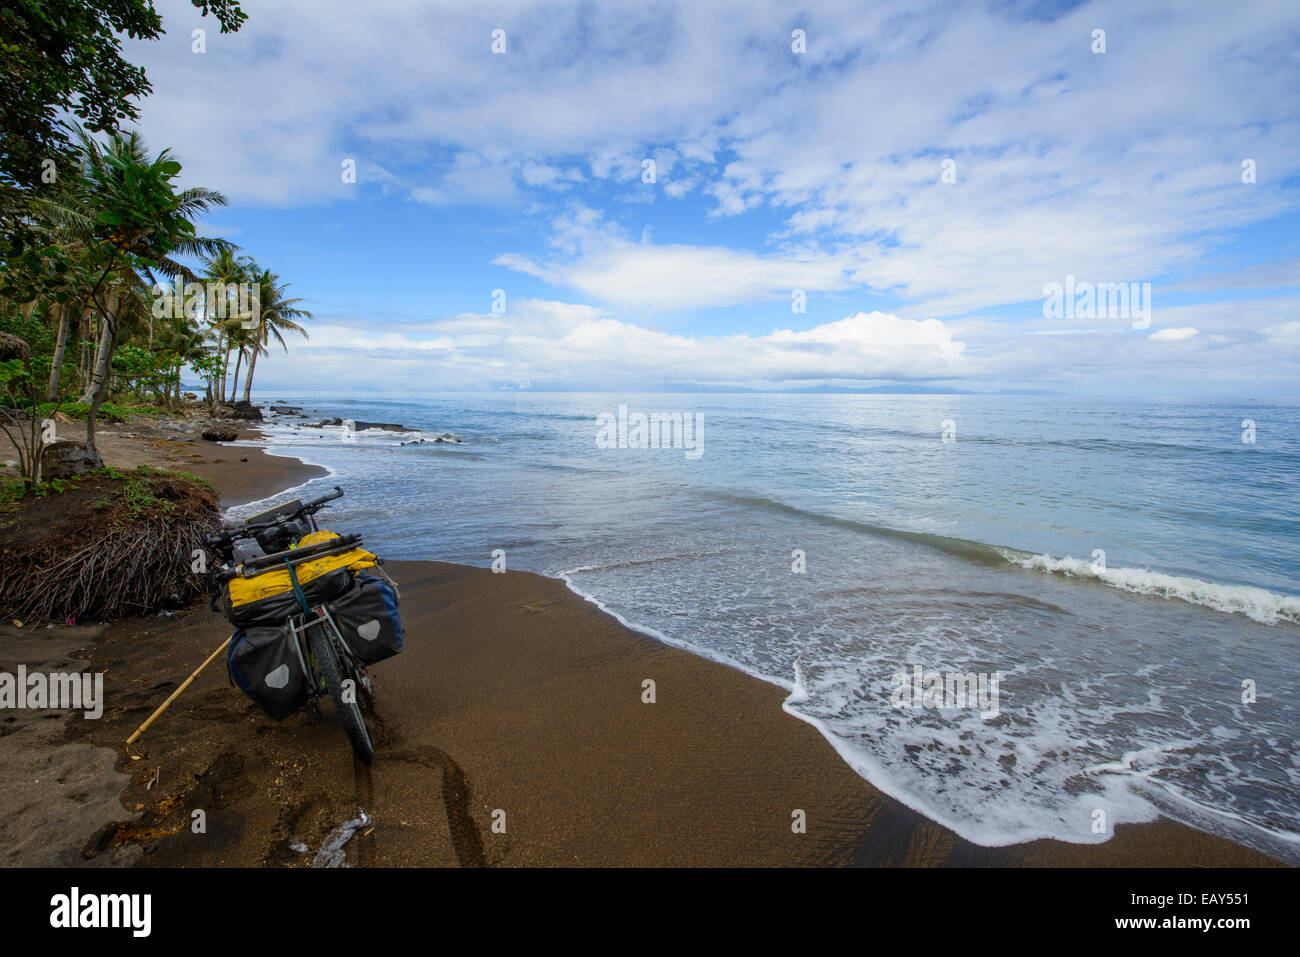 Bicycle on the beach of Caramoan peninsula, Philippines Stock Photo